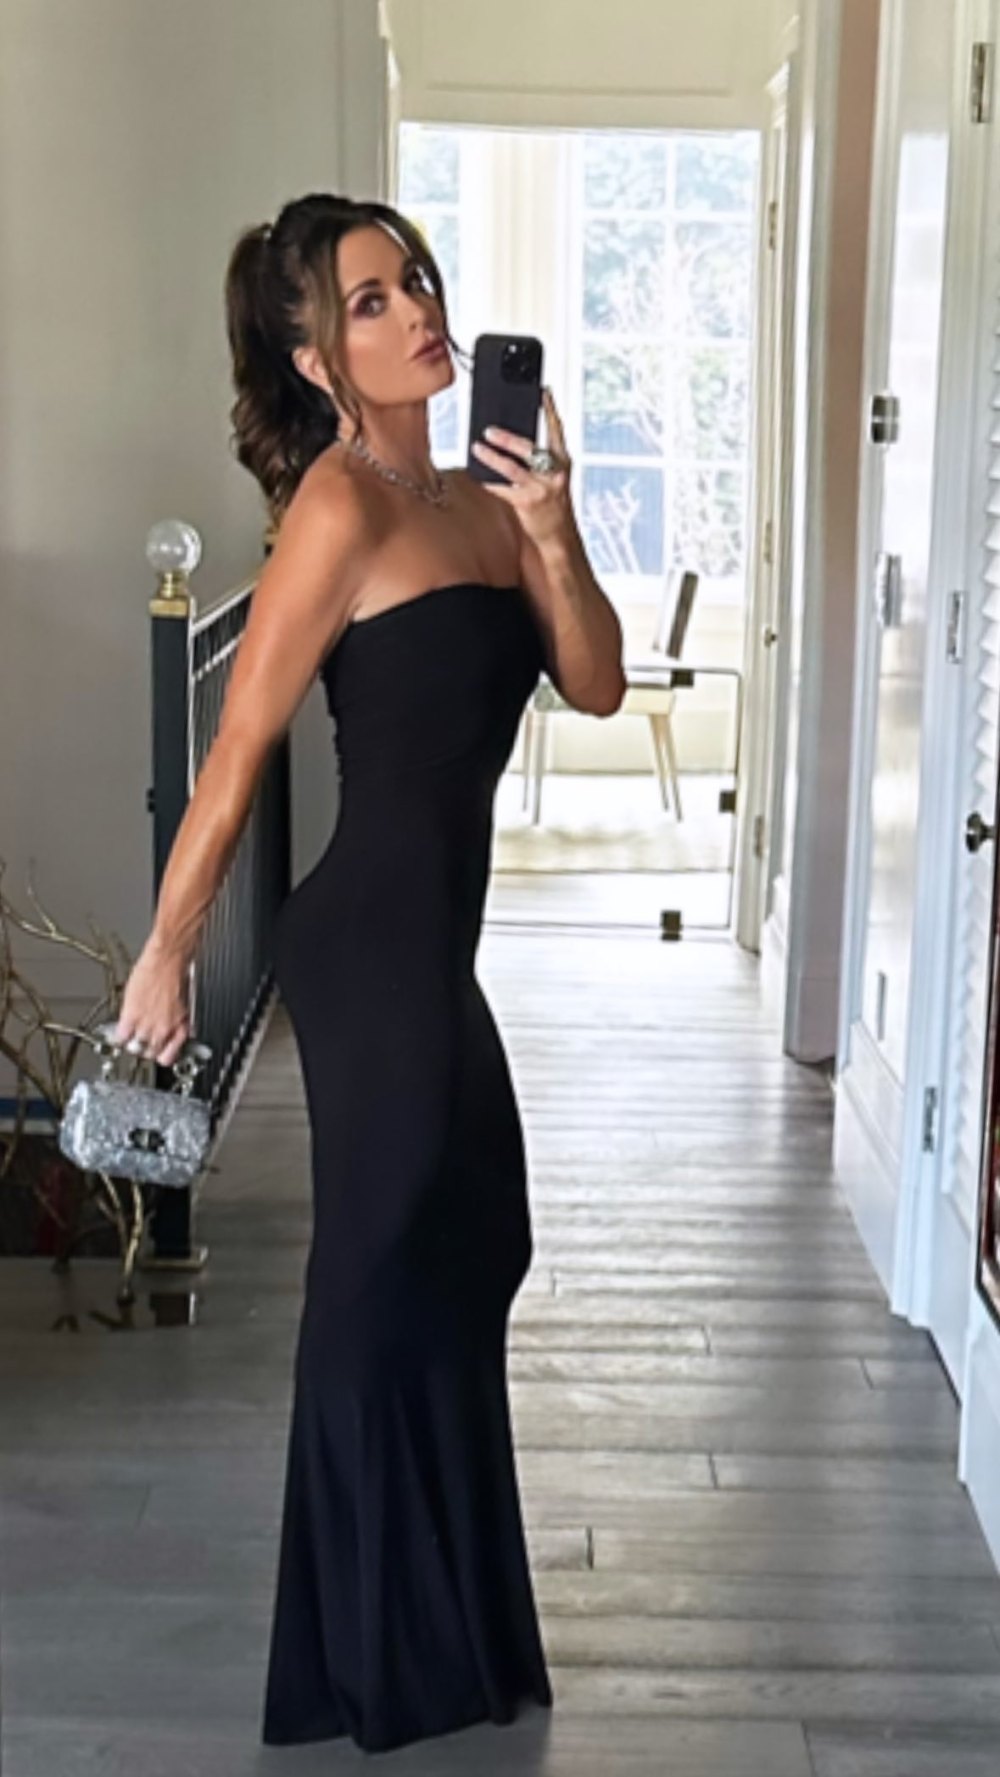 Kyle Richards Rocks Daughter Alexia’s Dress to Oscars Party After Weight Loss